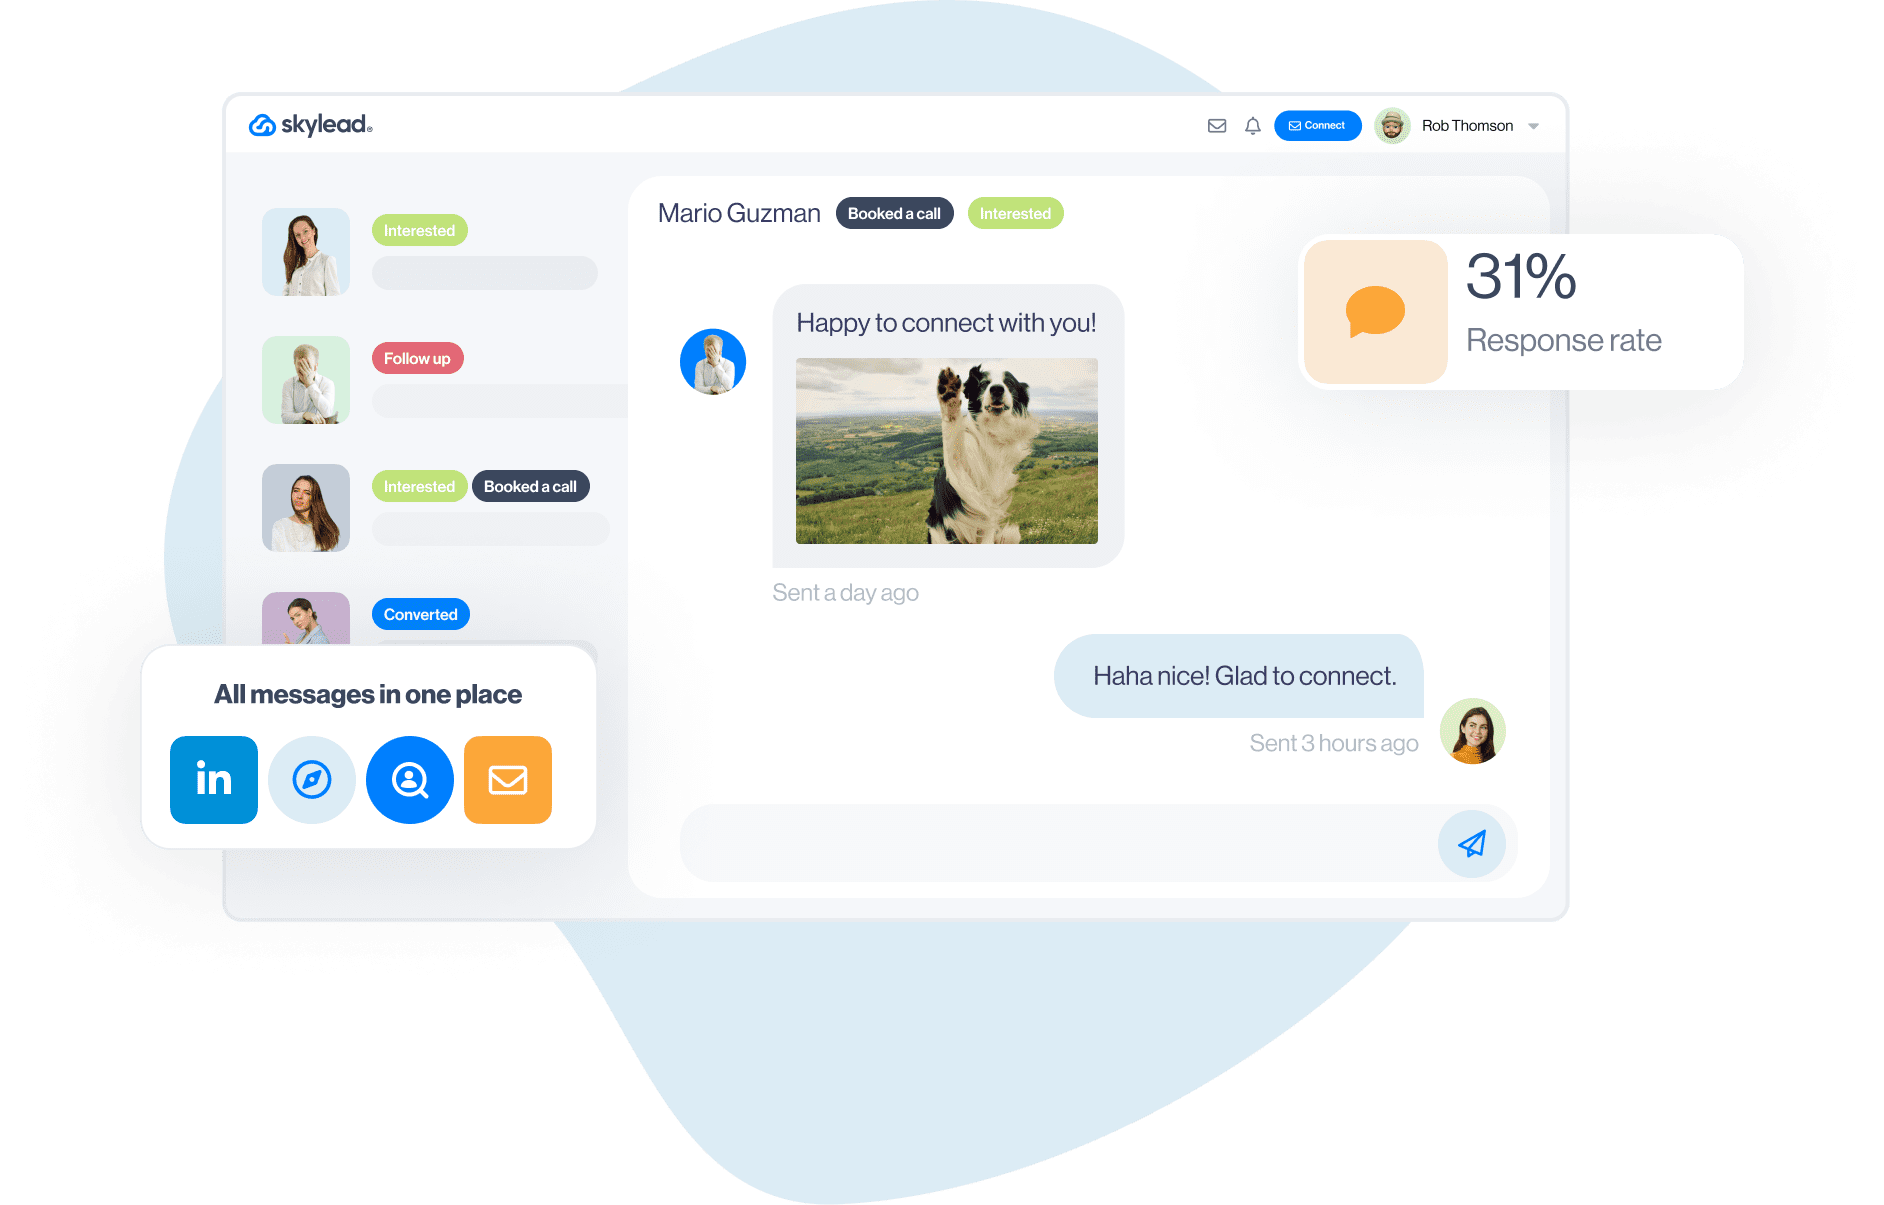 Image of Skylead Smart Inbox with messages integrations box with logos of LinkedIn, Sales Navigator, Recruiter and email along with the card of conversion results - 31% response rate